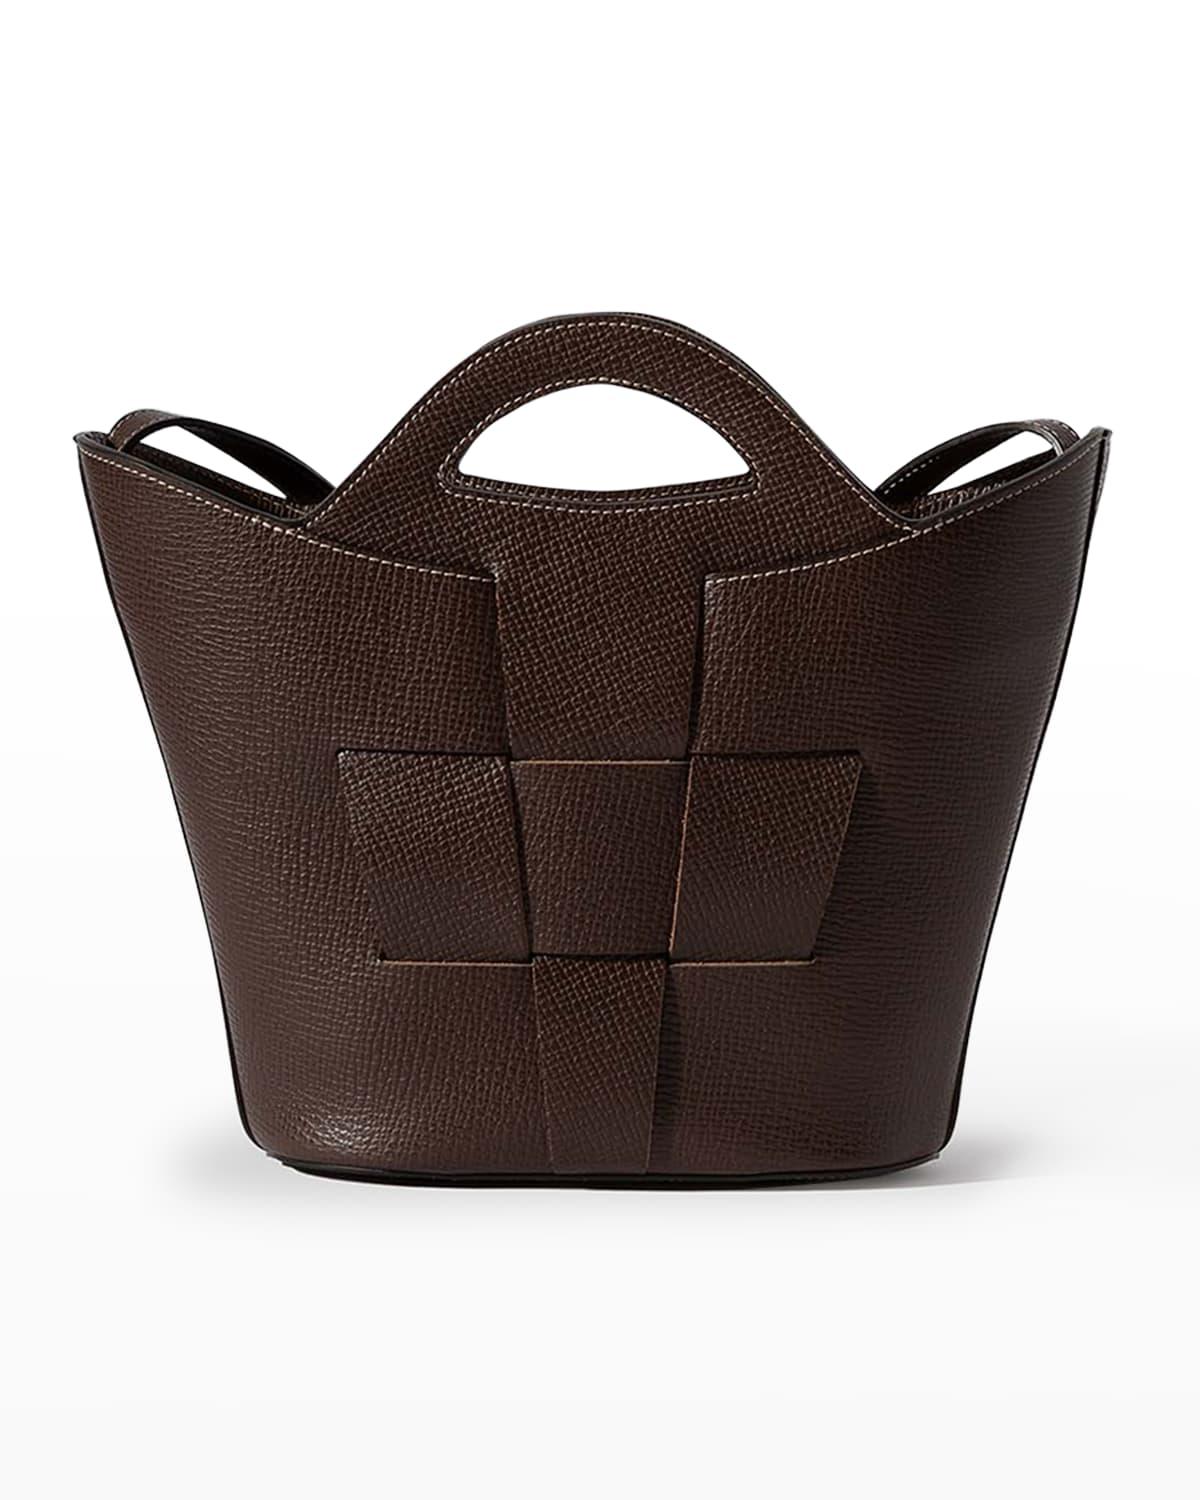 Hereu Bombon Woven Leather Top Handle Bag in Natural